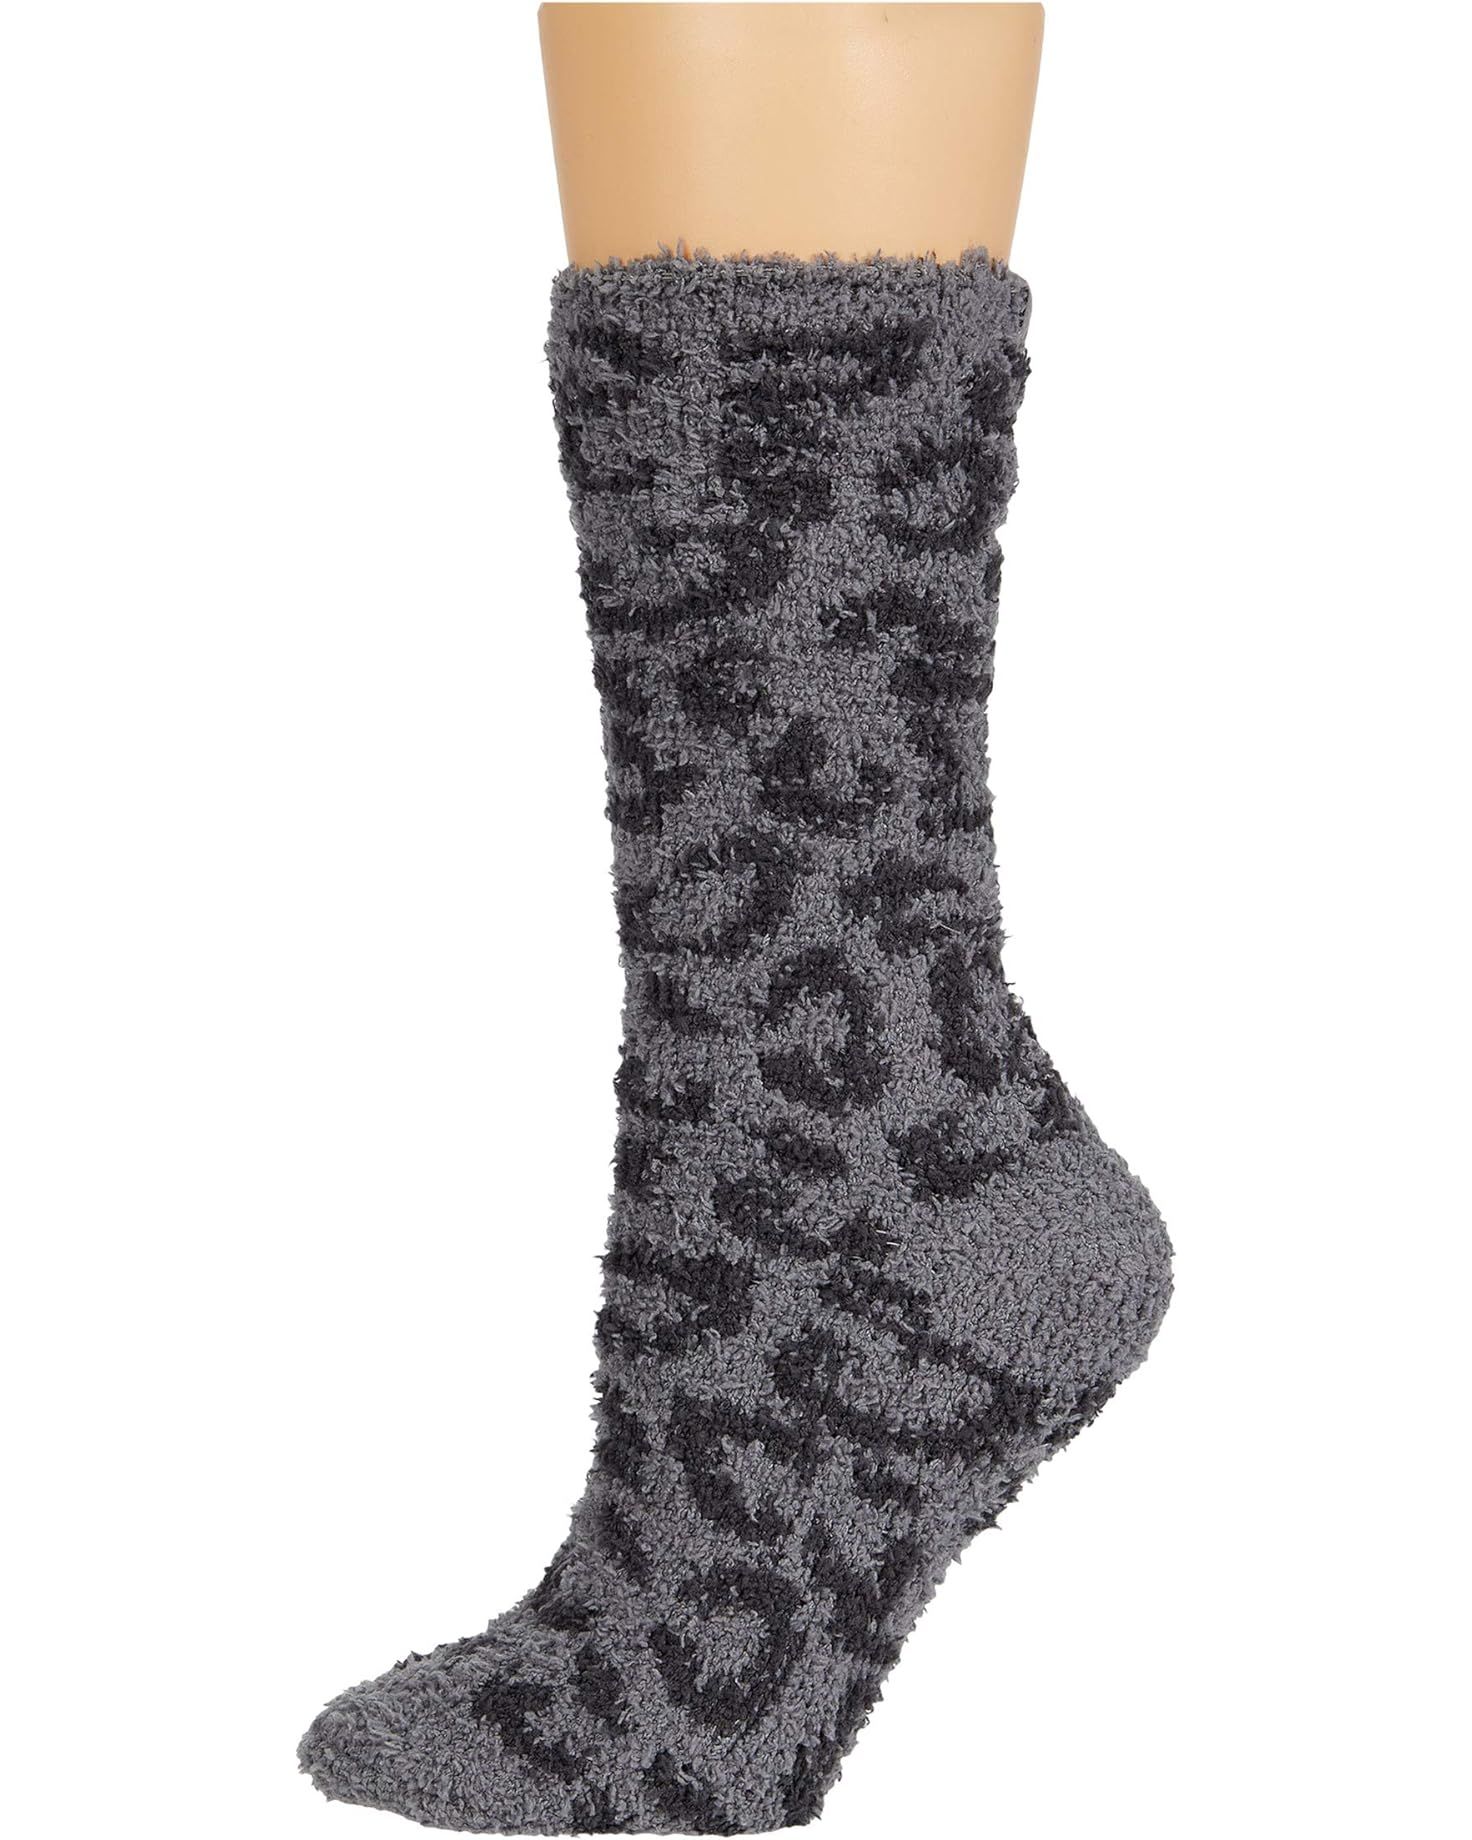 Barefoot Dreams Cozychic Barefoot In The Wild Sock | Zappos